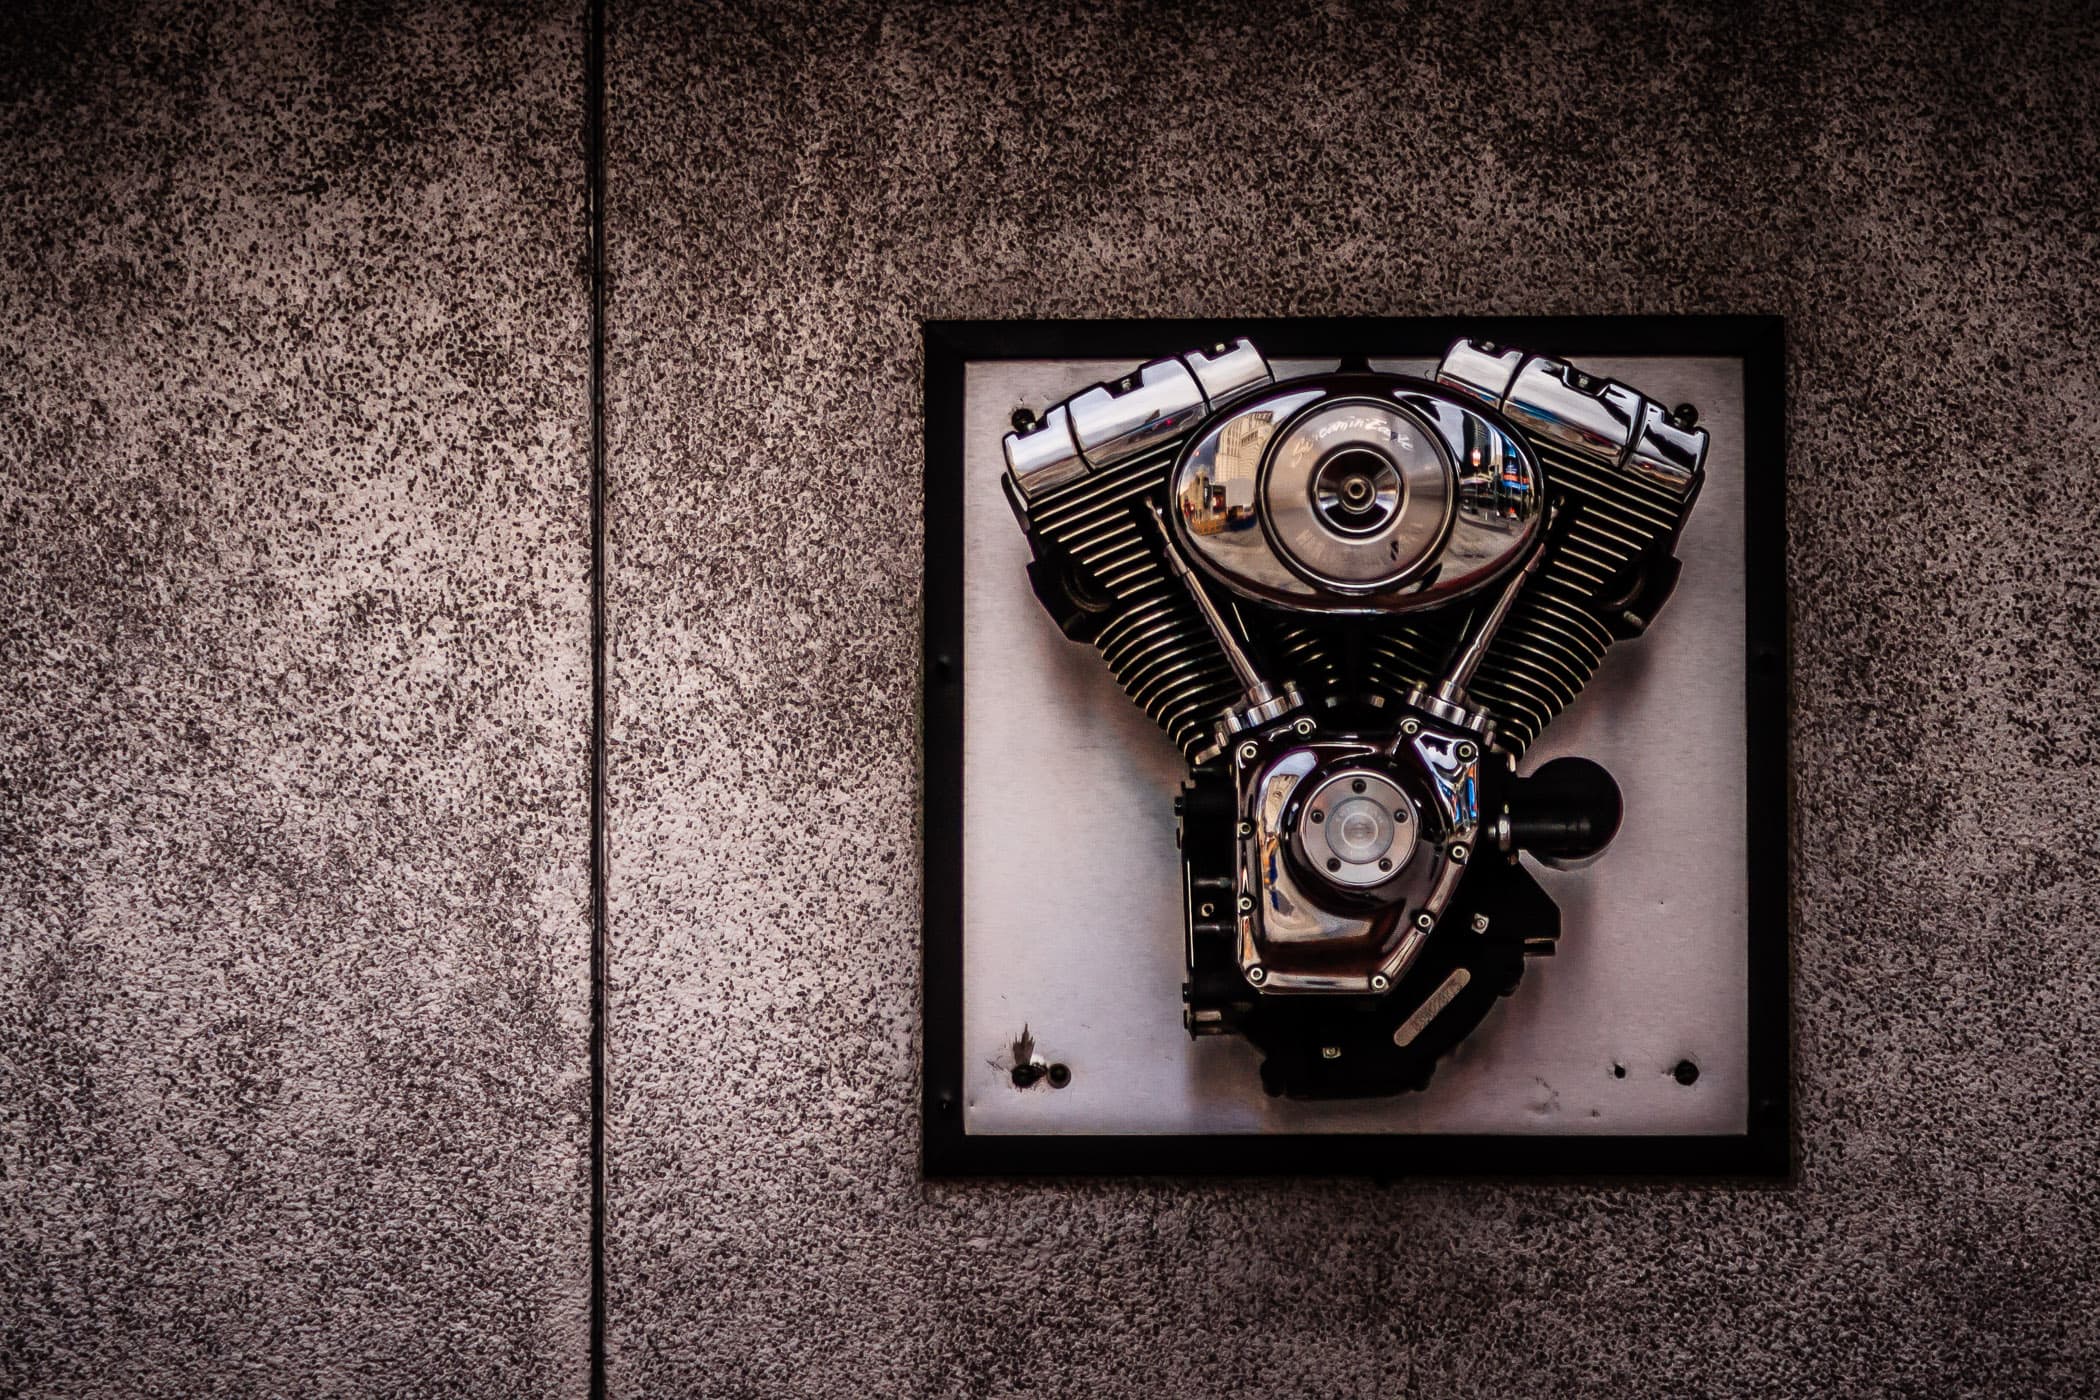 A V-Twin motorcycle engine mounted on a wall outside of the Harley-Davidson Cafe in Las Vegas.